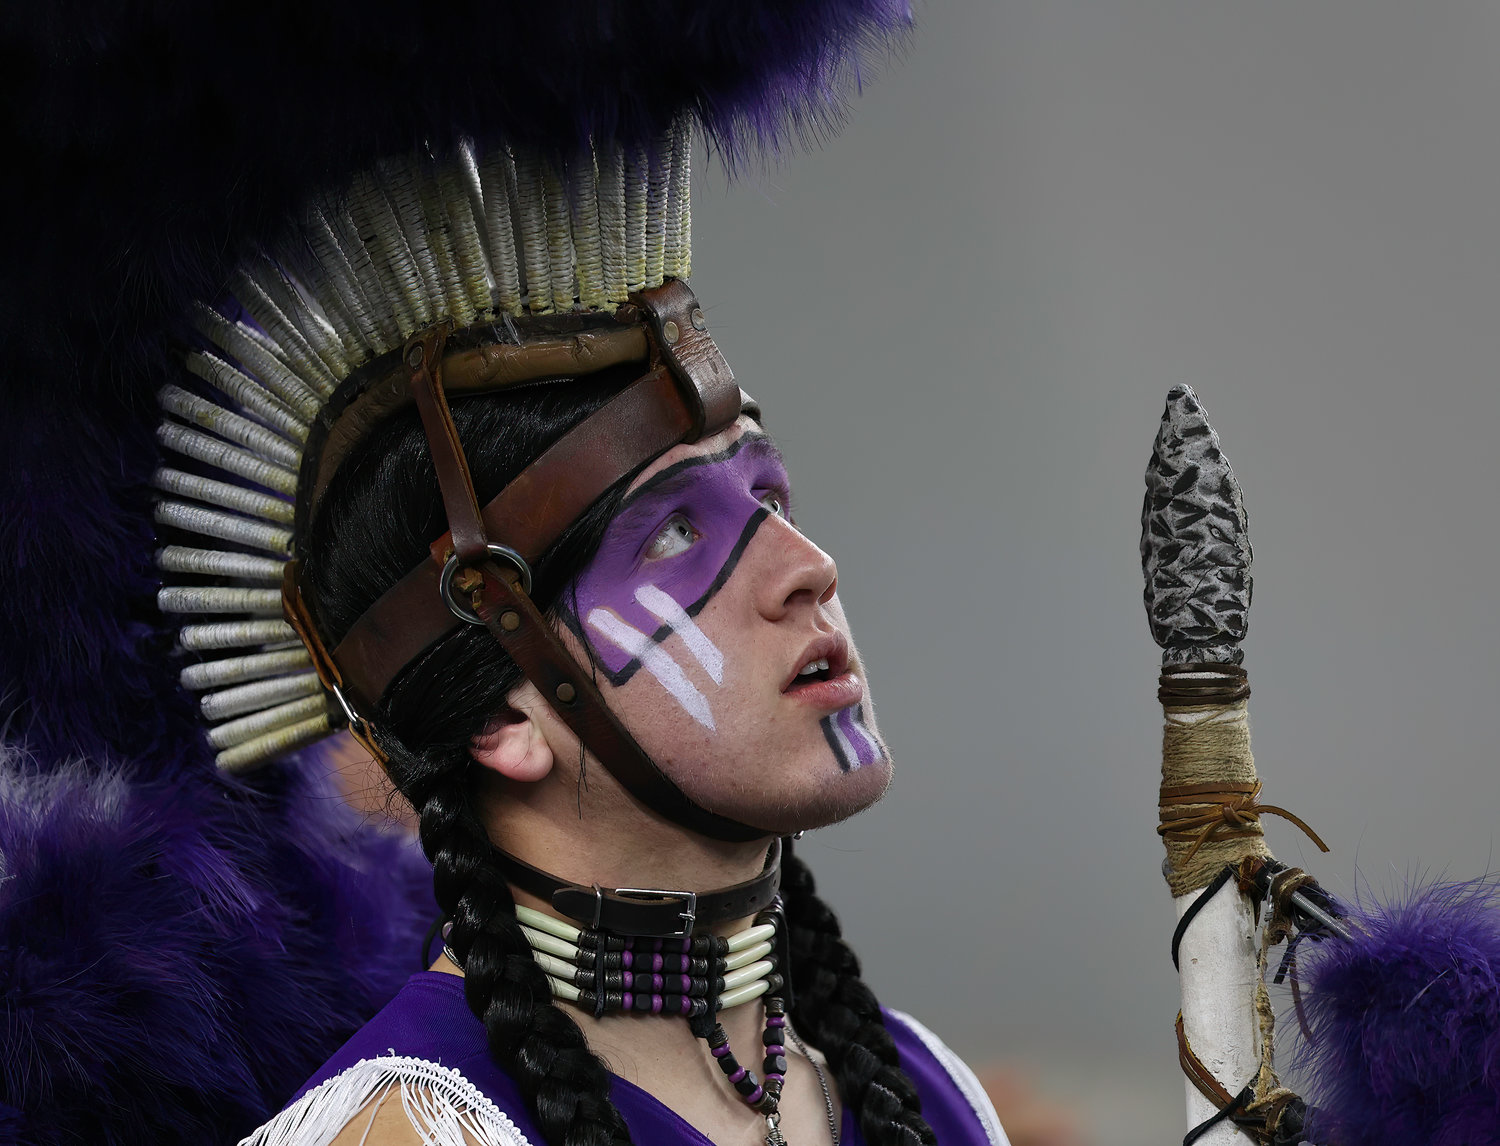 The Port Neches-Groves Indians mascot looks up at the video board during the Class 5A Division II football state championship game between South Oak Cliff and Port Neches-Groves in Arlington, Texas, on Dec. 16, 2022.